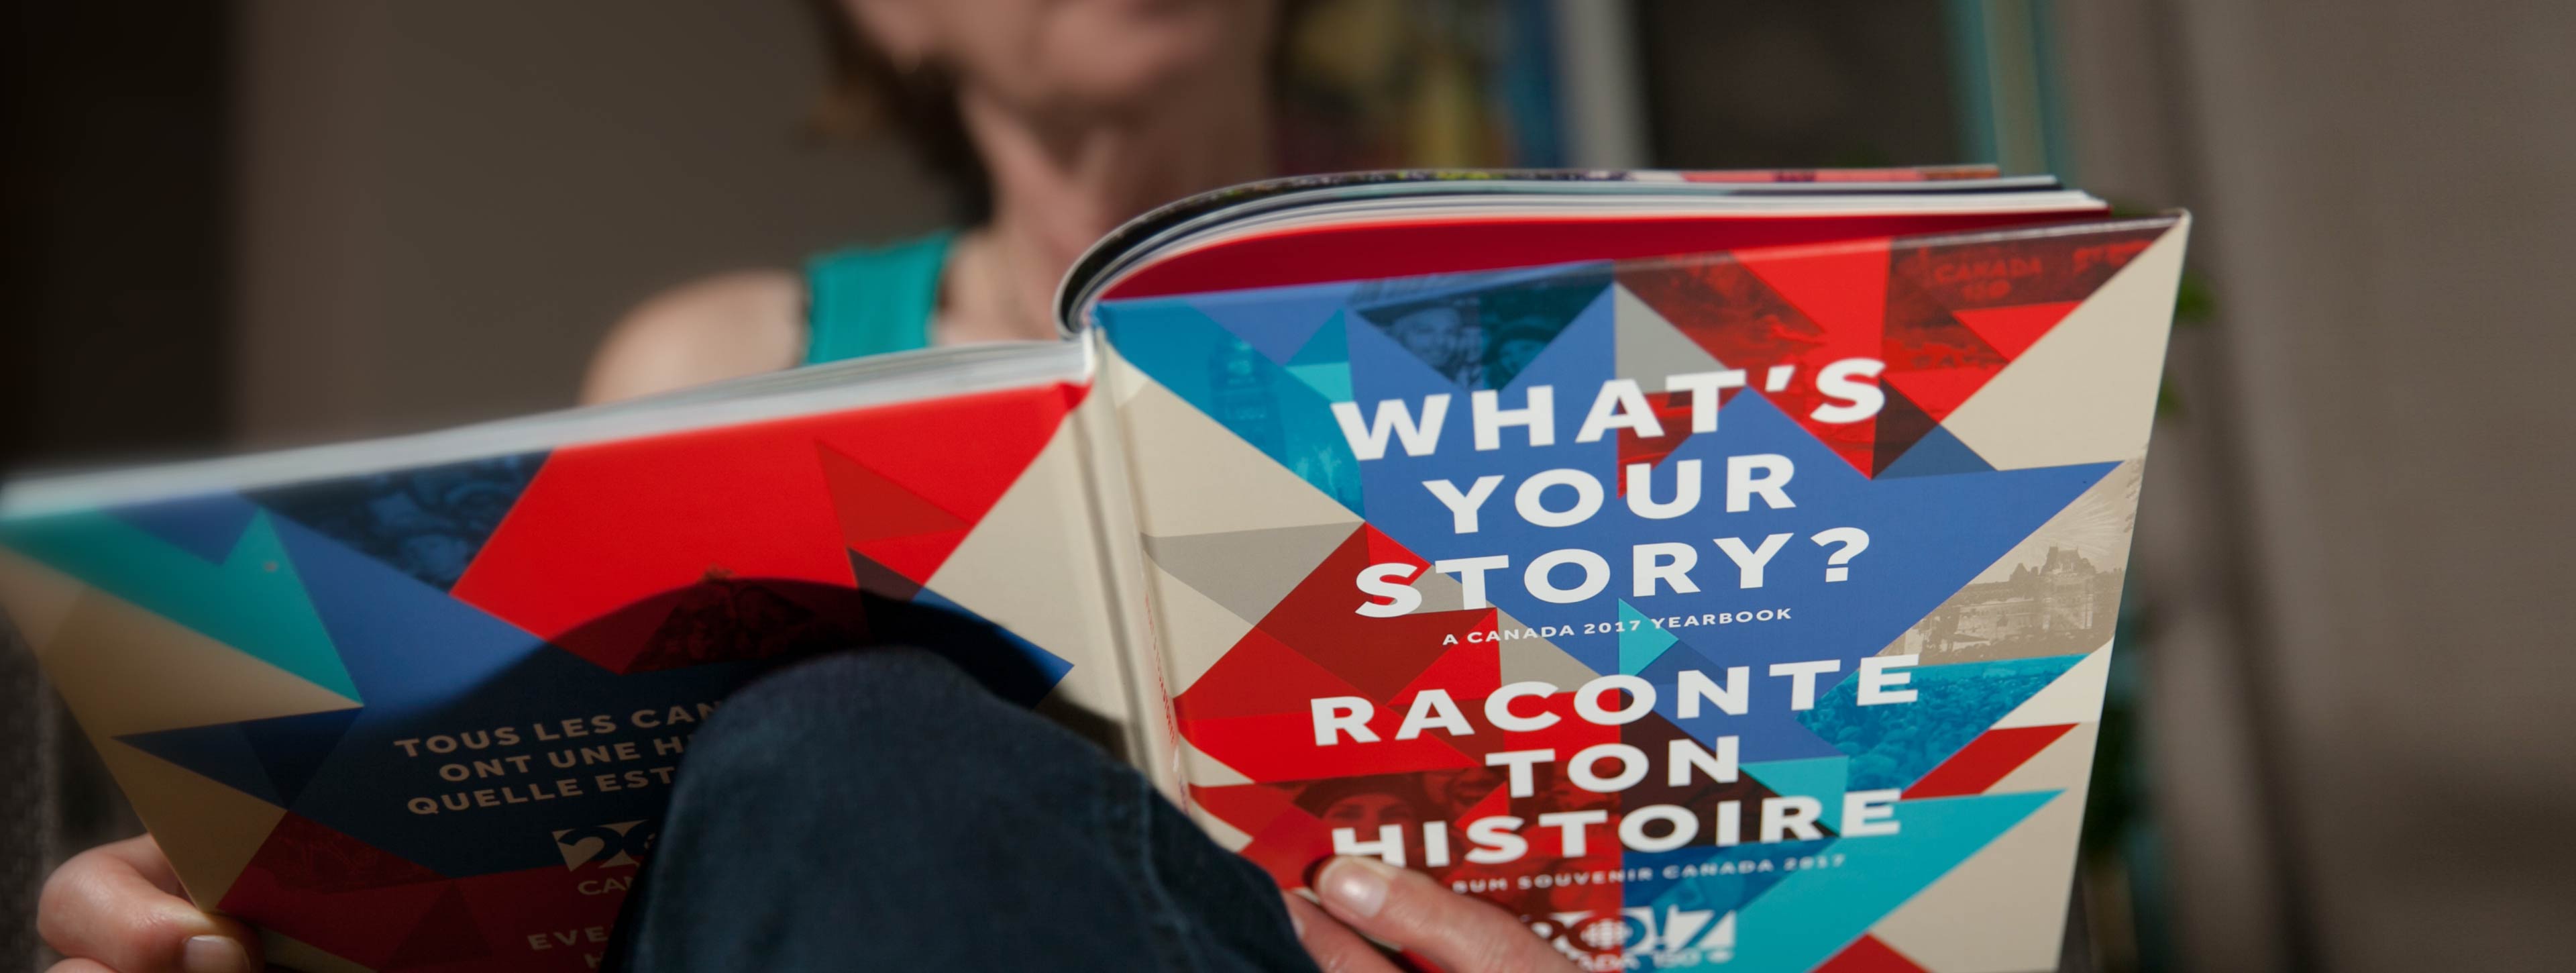 The What's Your Story – A Canada 2017 Yearbook.